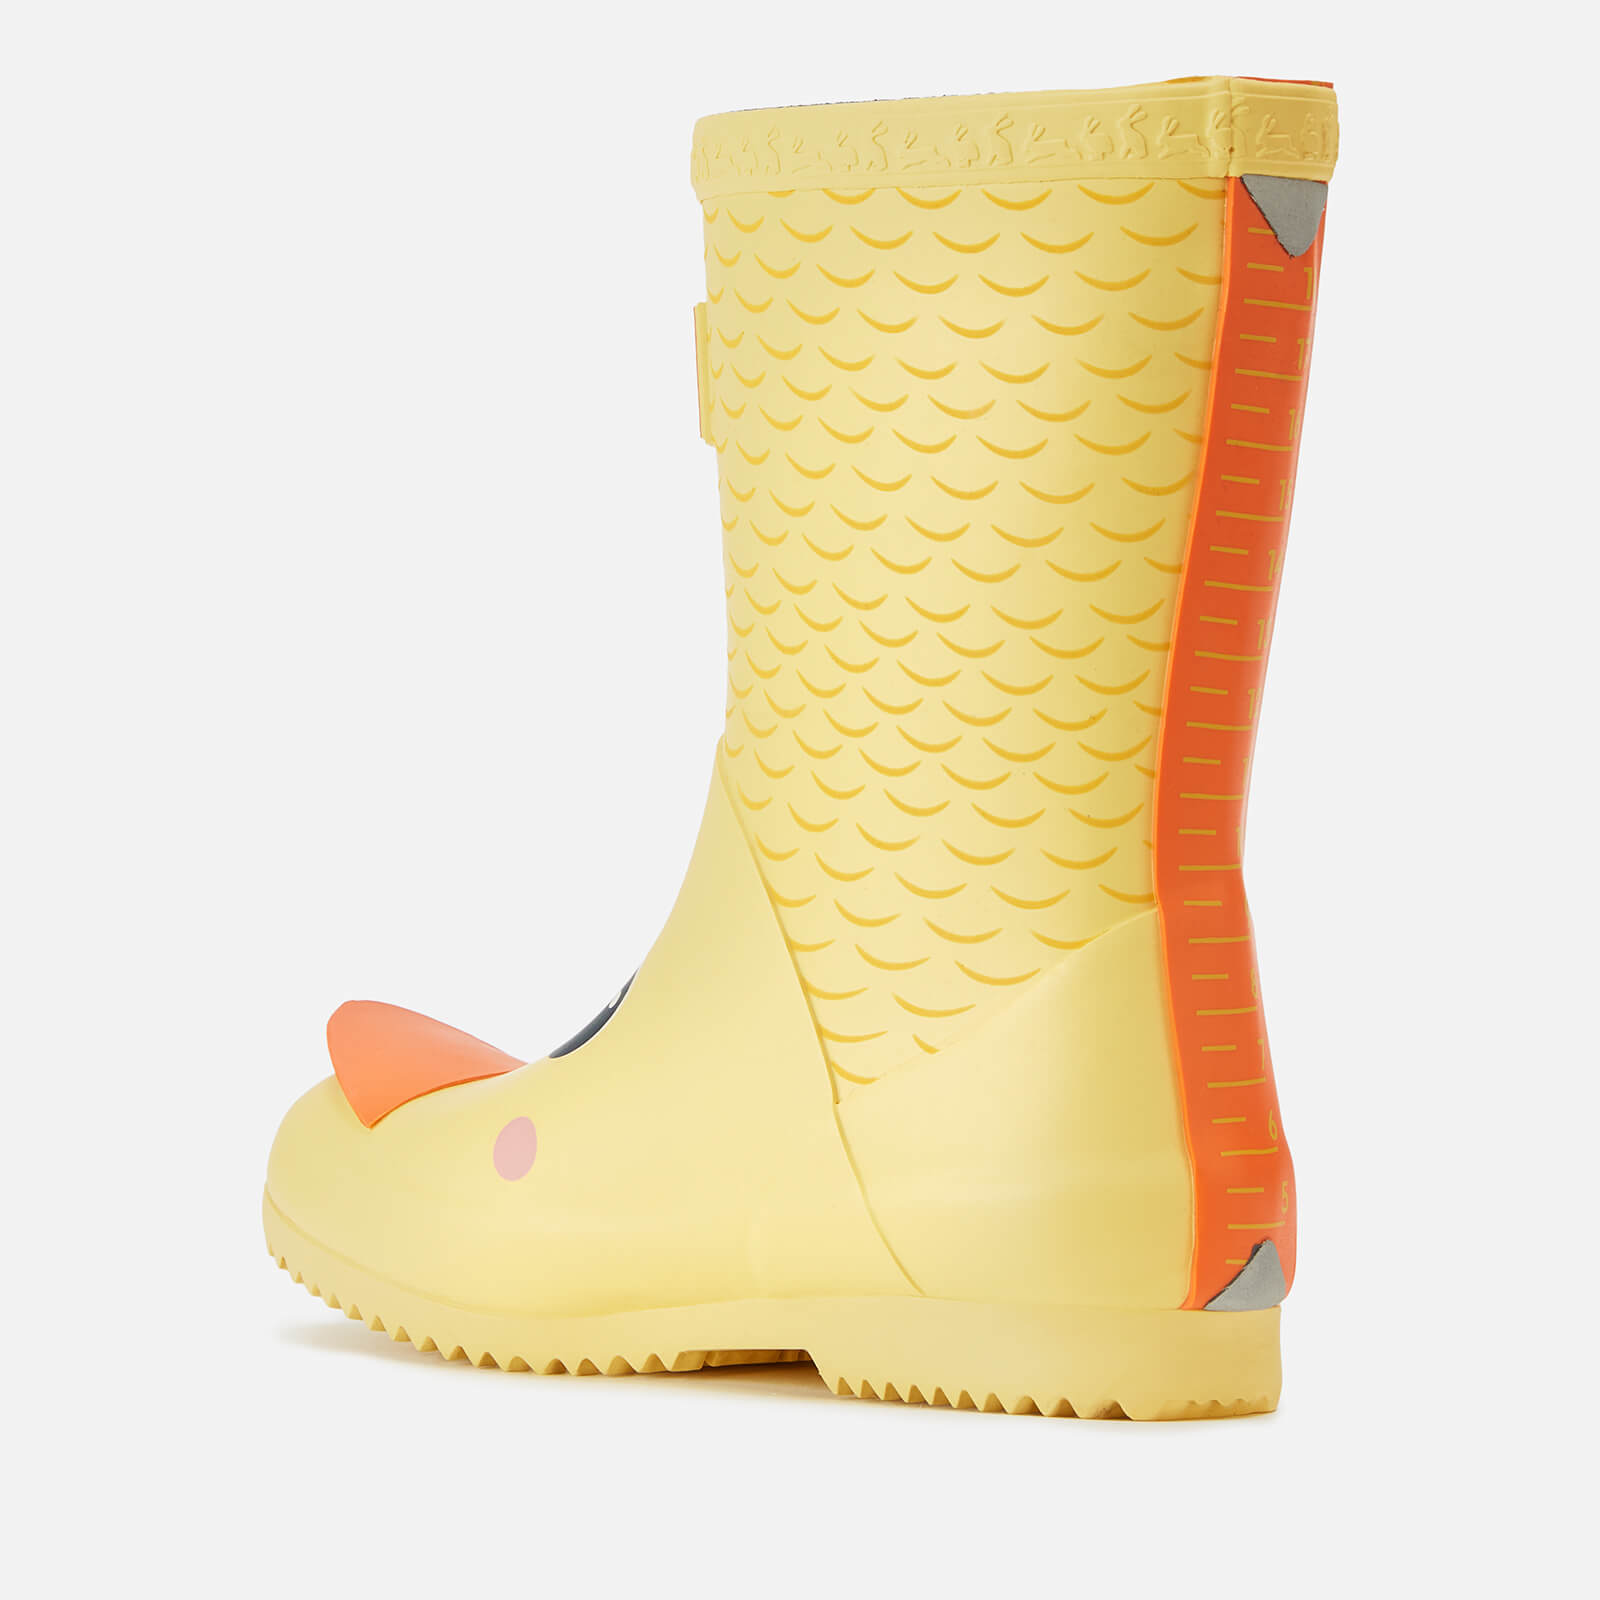 Joules Kids' Printed Wellies - Yellow Duck - Uk 8 Toddler 216592 Yelwduck Childrens Clothing, Yellow